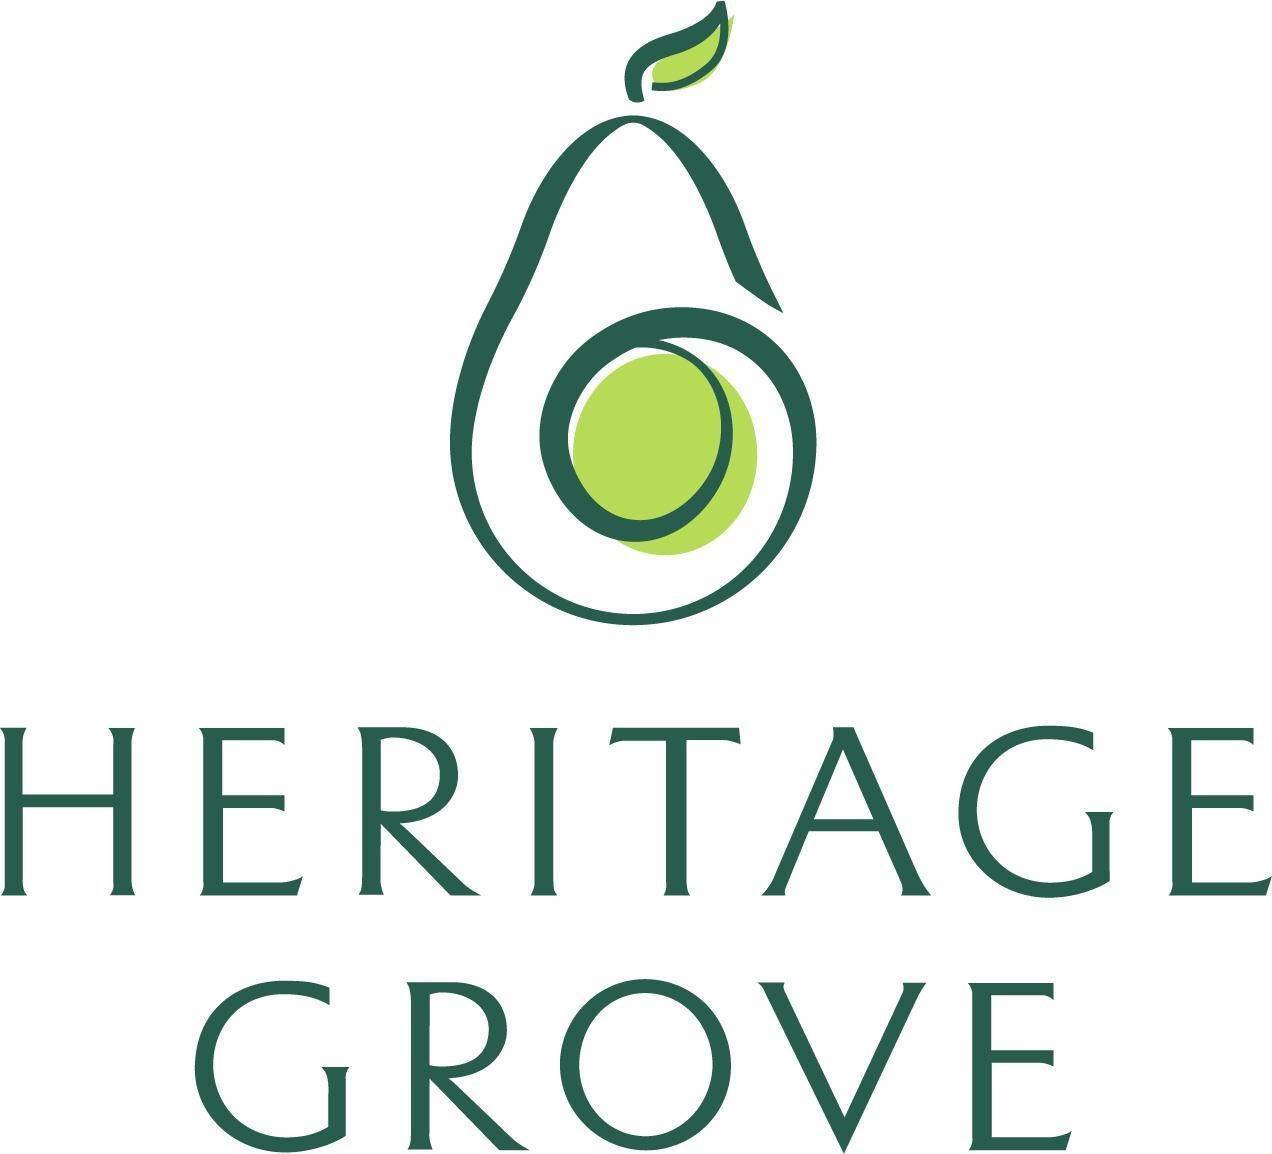 2. Heritage Grove building at 399 E Heritage Valley Pkwy, Fillmore, CA 93015